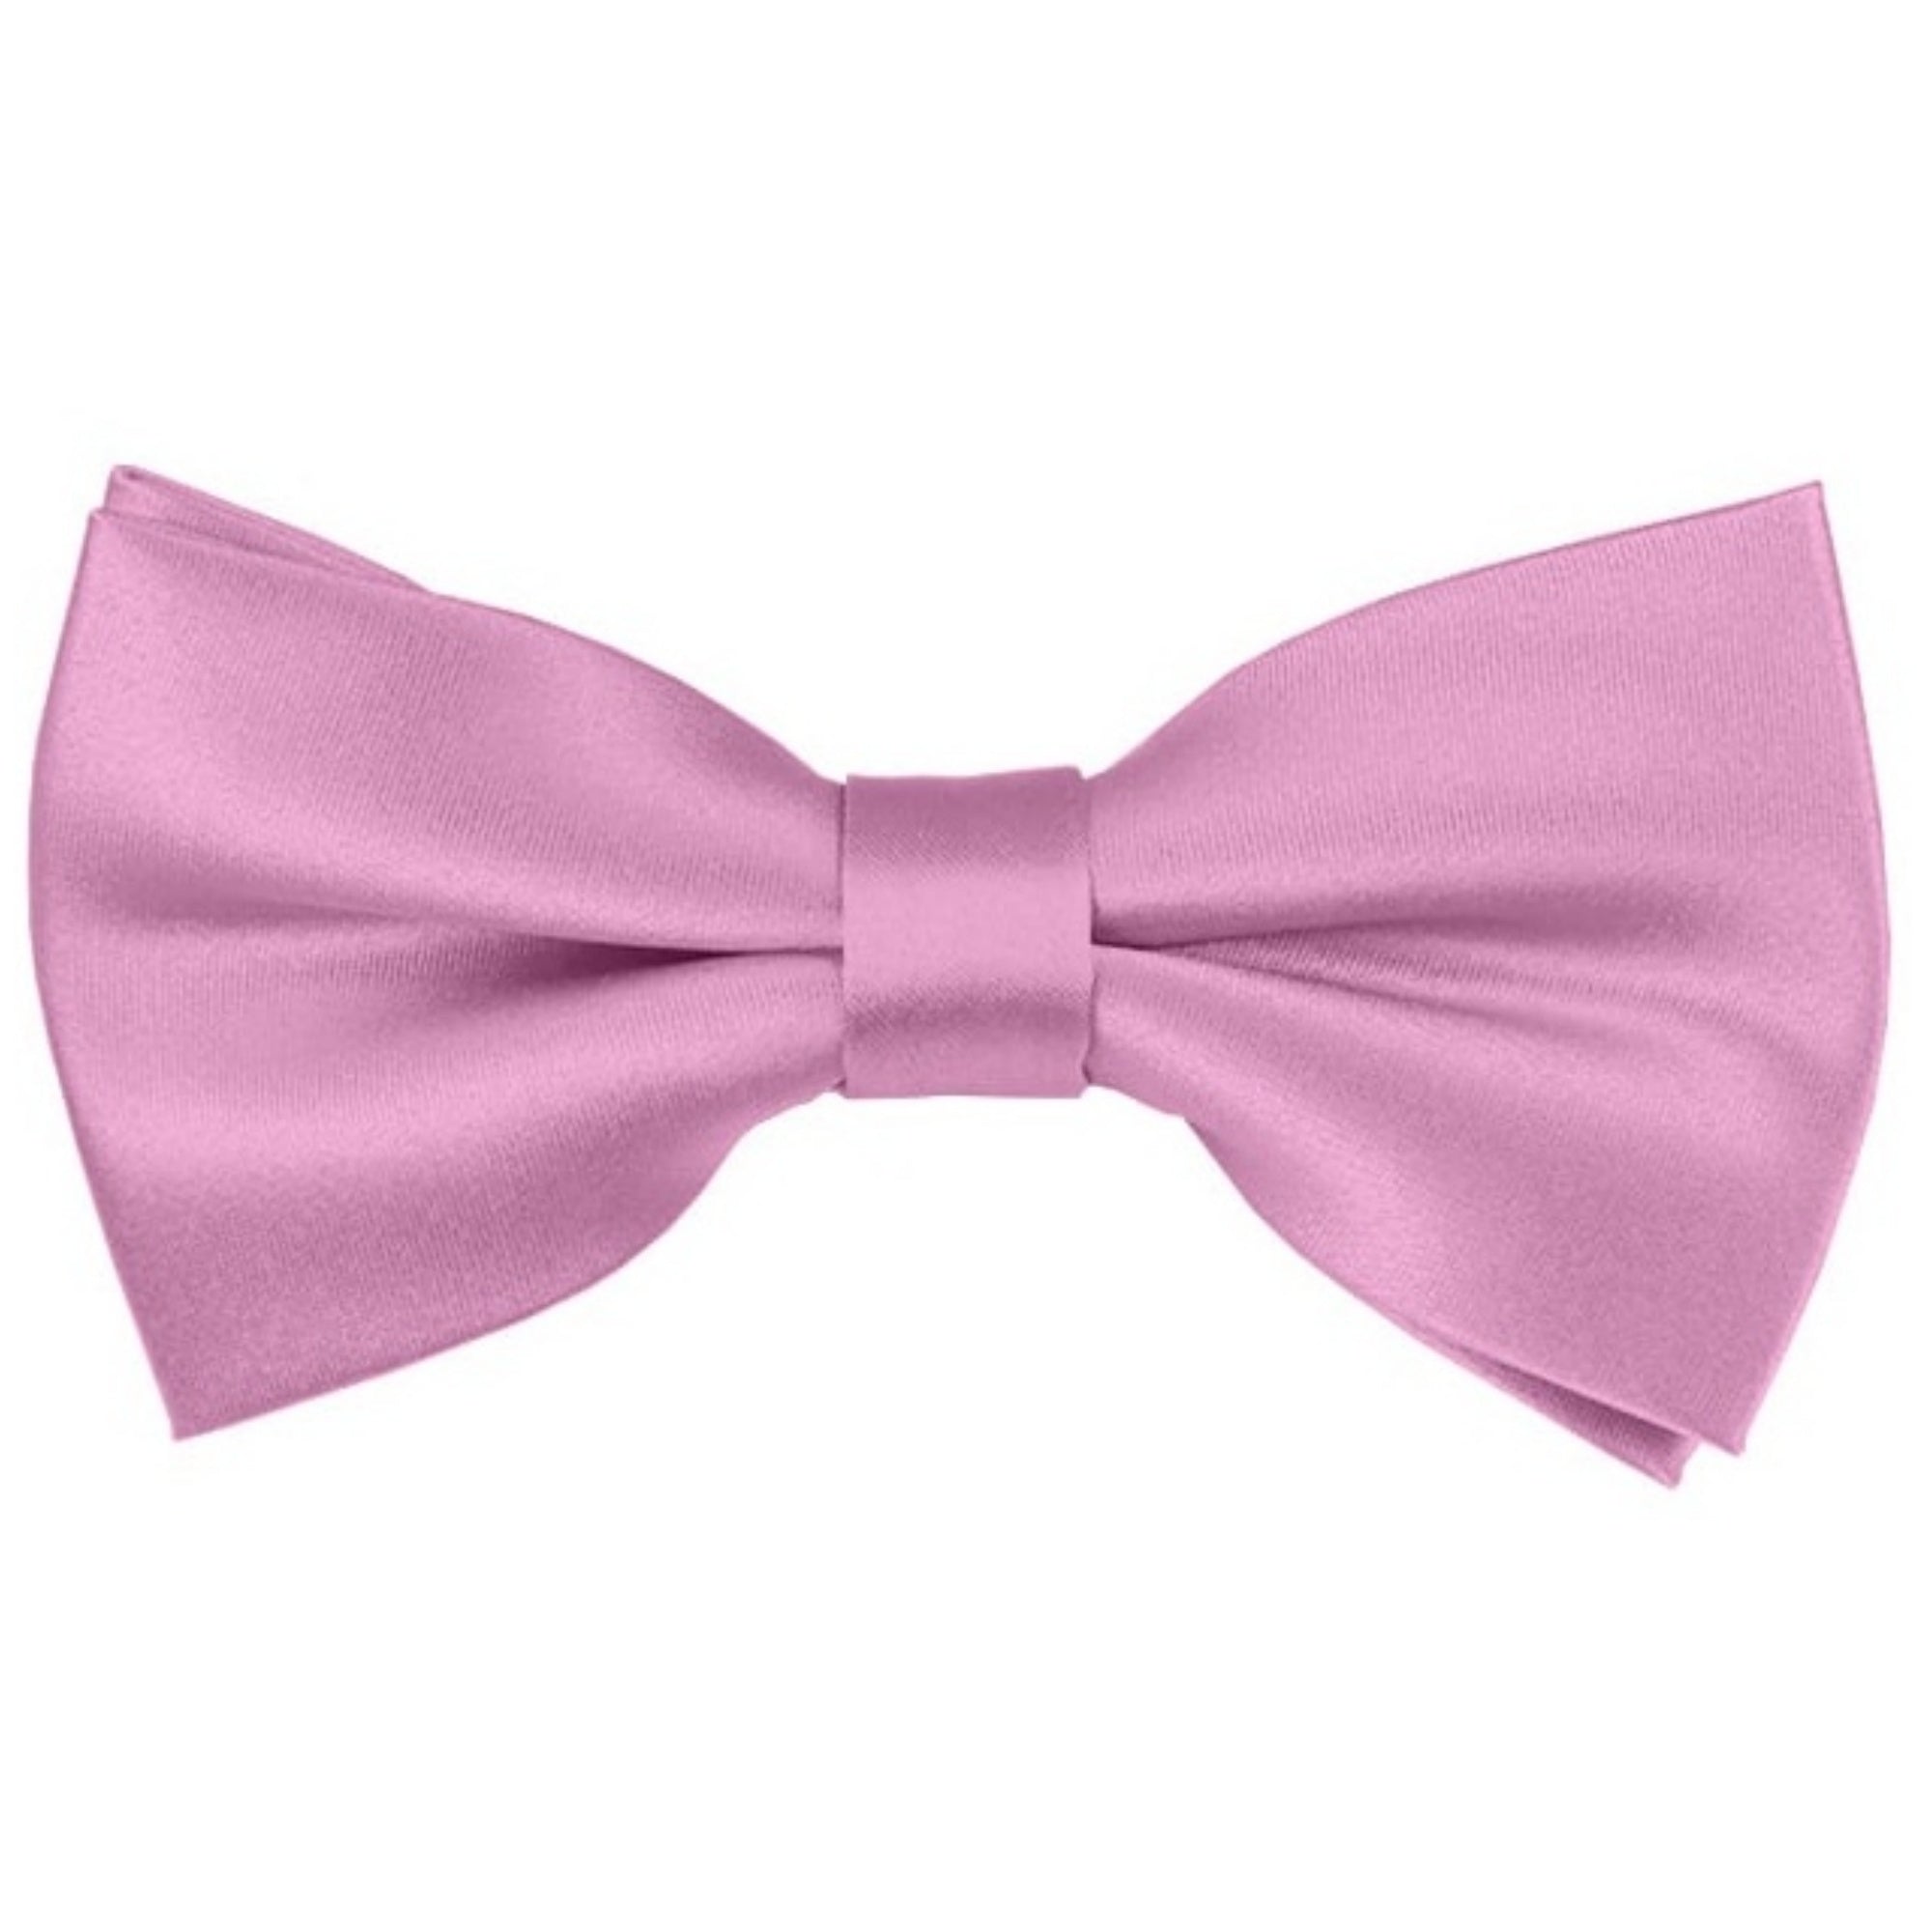 TheDapperTie Men's Solid Color 2.5 W And 4.5 L Inch Pre-Tied adjustable Bow Ties Men's Solid Color Bow Tie TheDapperTie Dusty Pink  